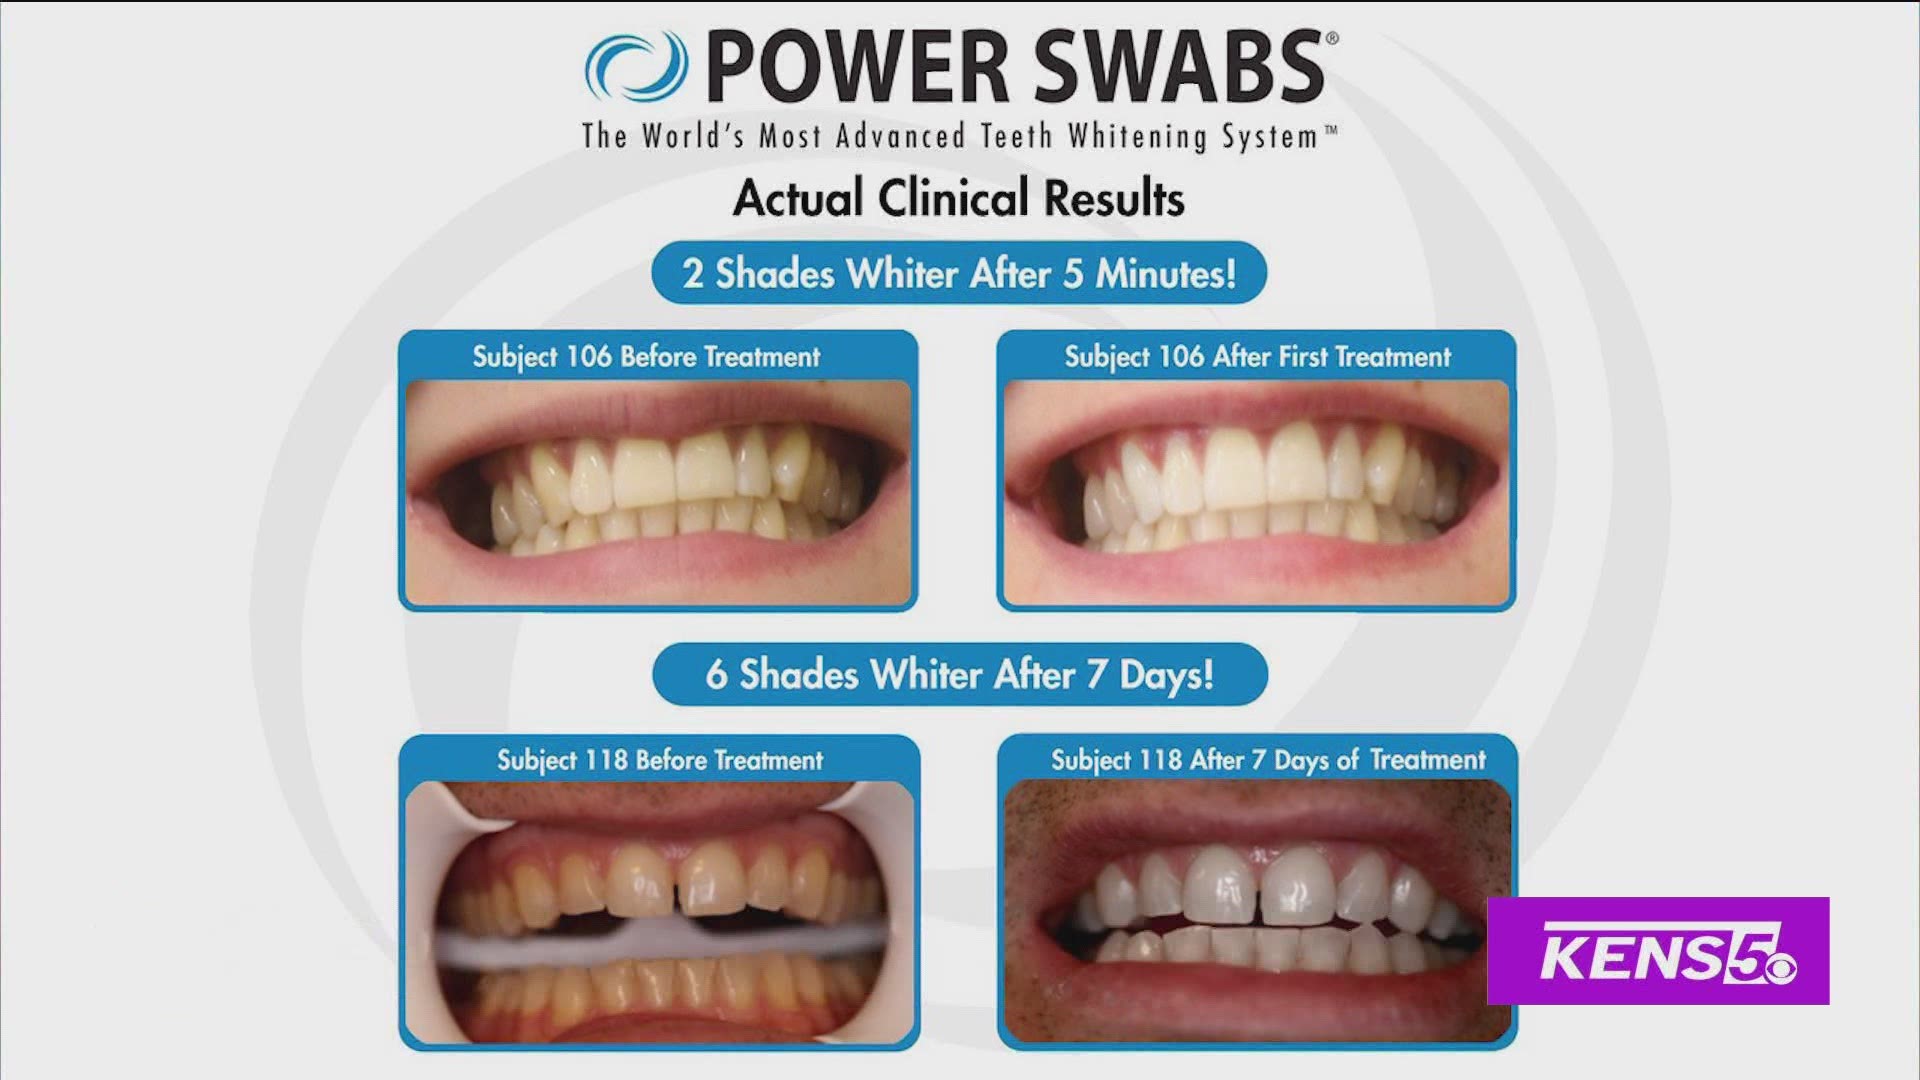 You don't need to go to a dentist to have a brighter and whiter smile, Power Swabs shows you why!